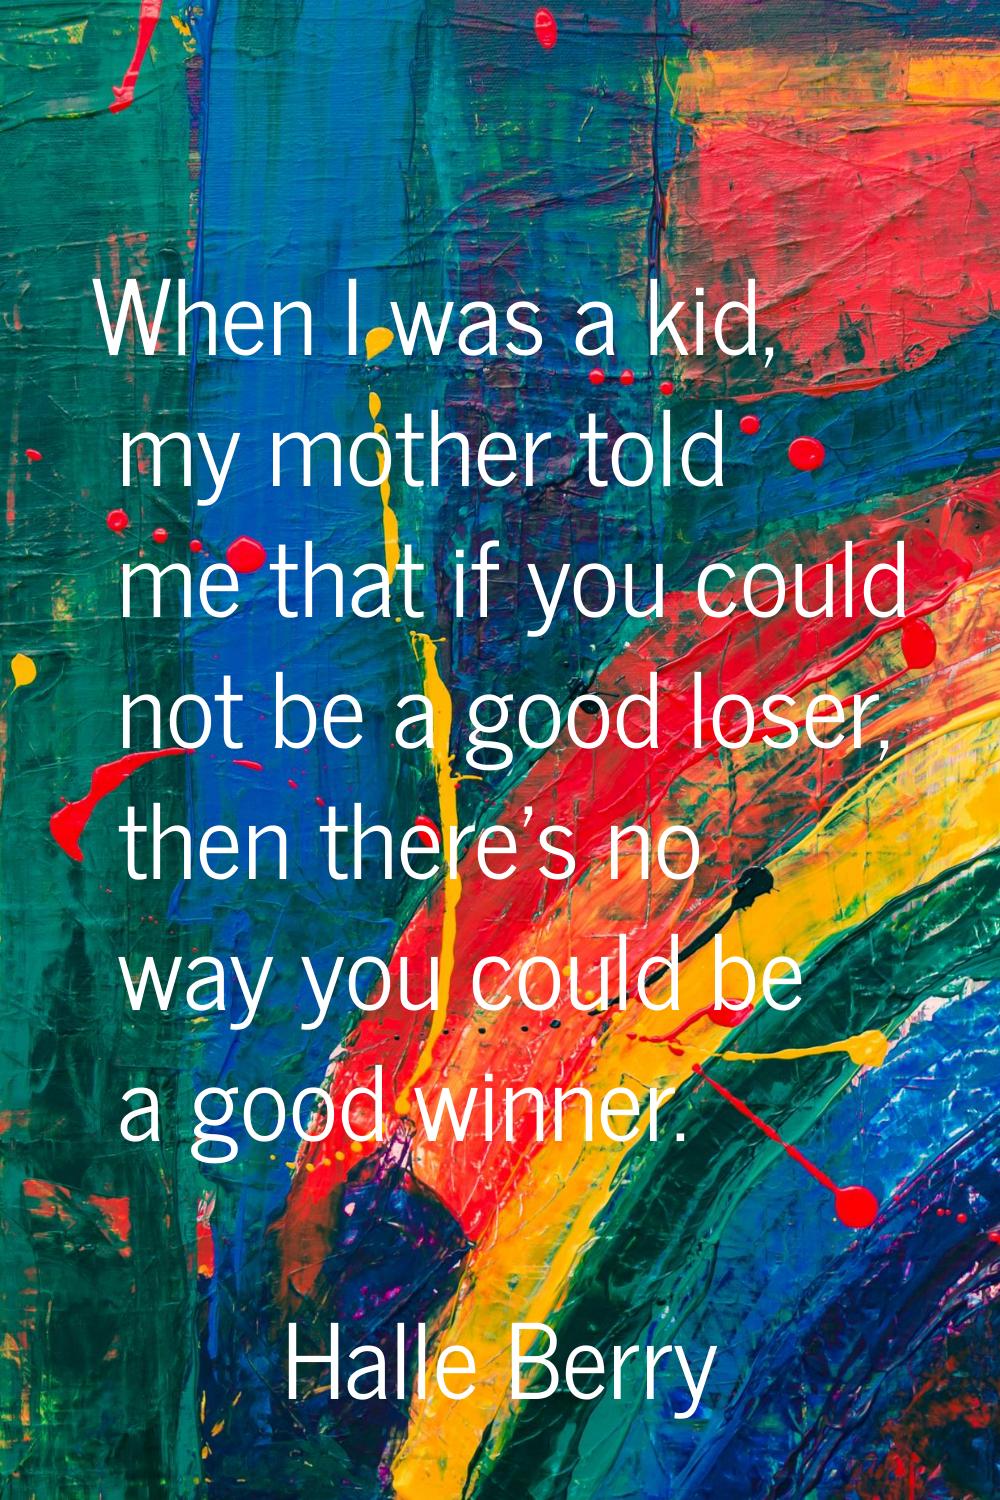 When I was a kid, my mother told me that if you could not be a good loser, then there's no way you 